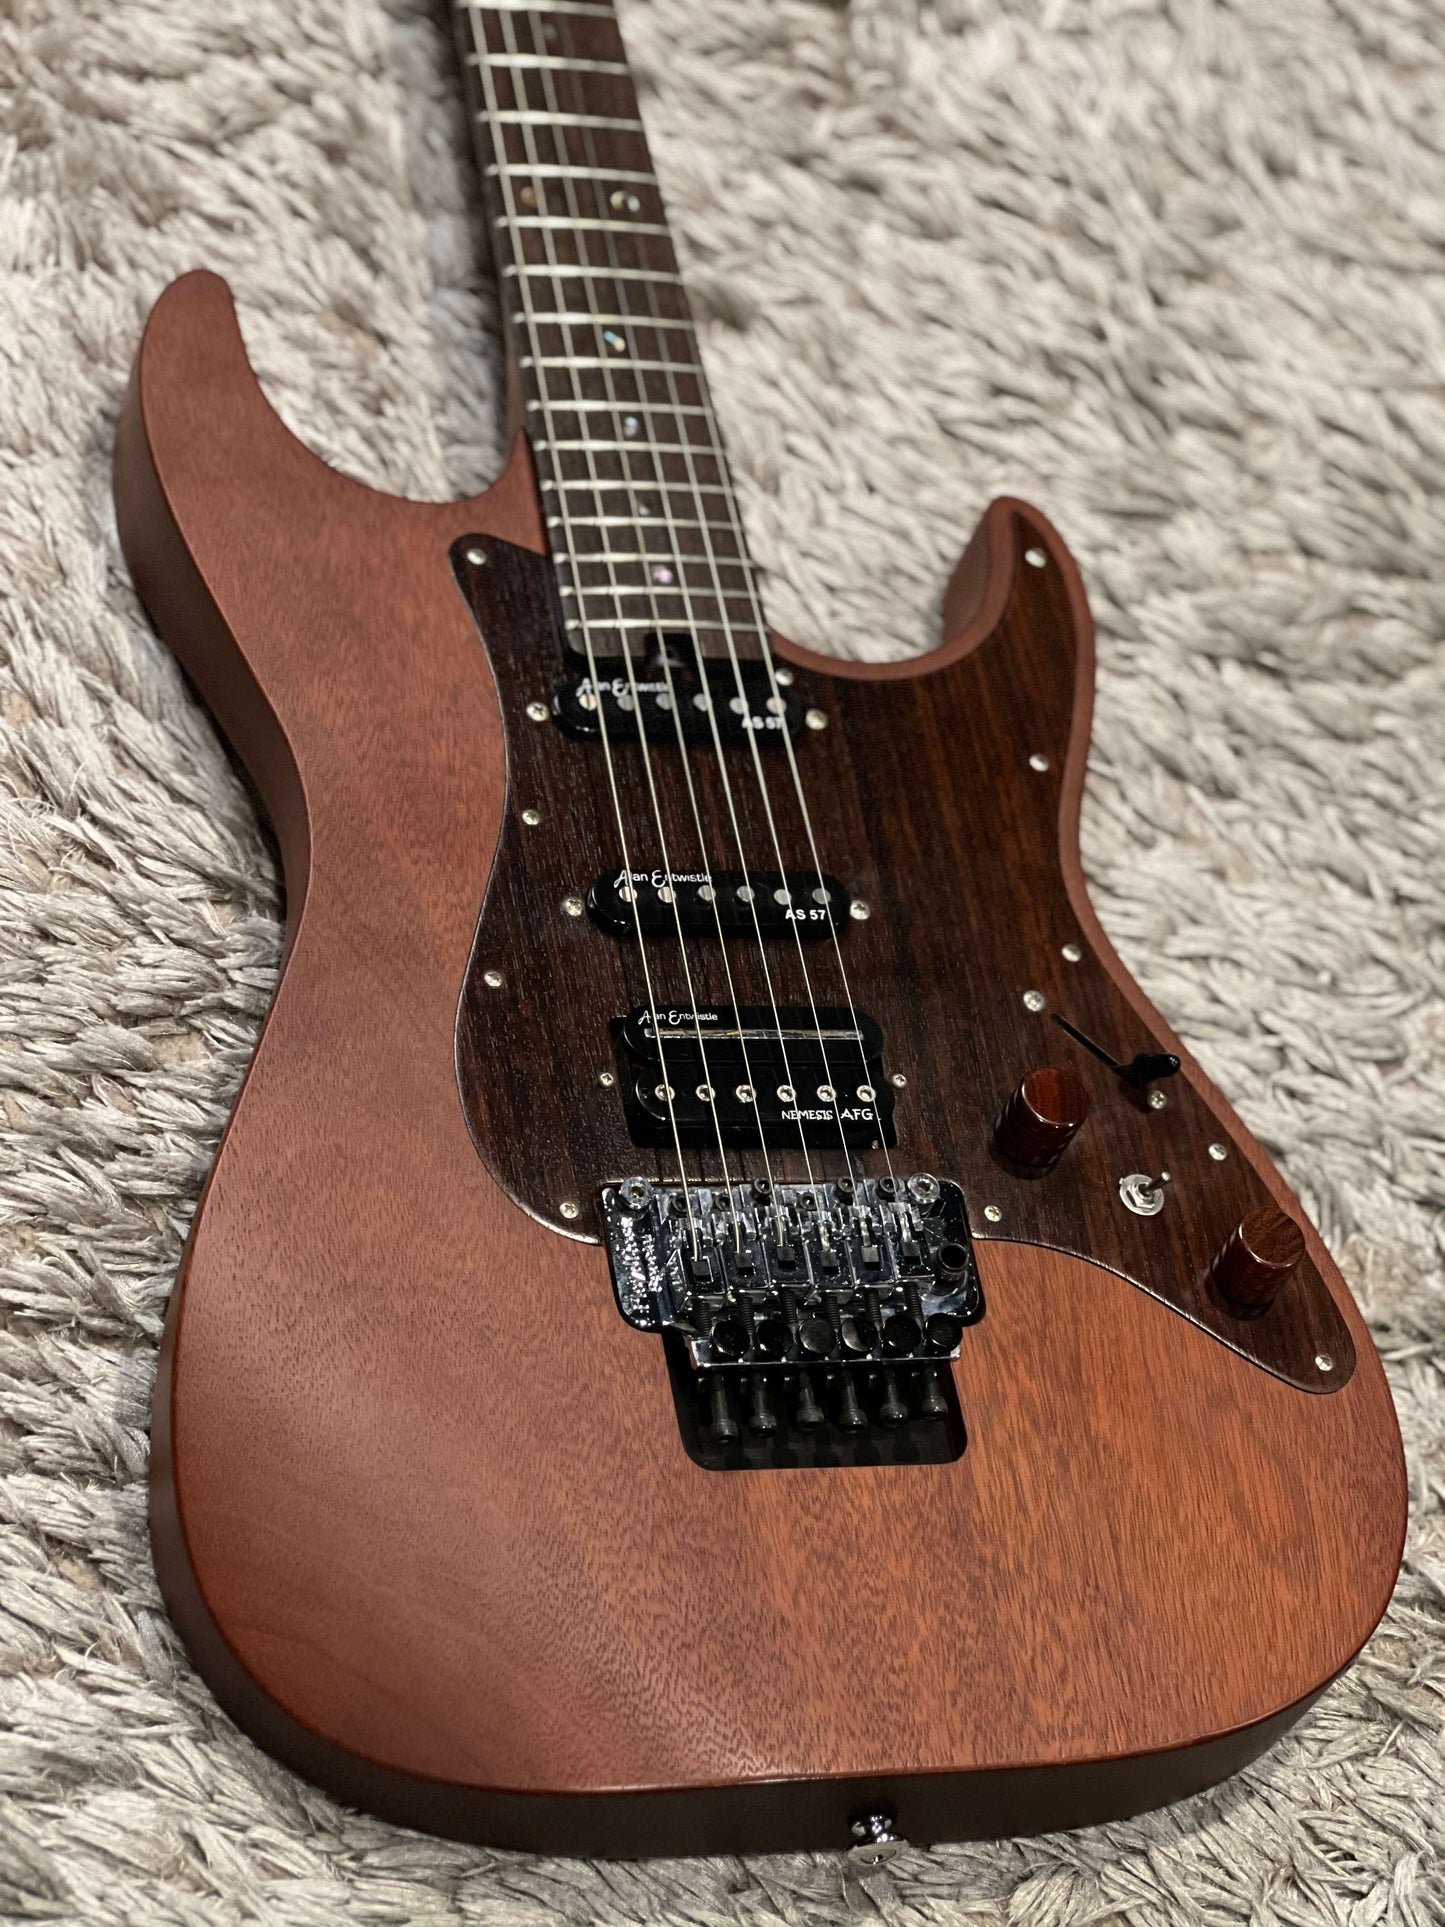 Soloking JSN-960 FR in Natural Coffee Brown Matte with Floyd Rose